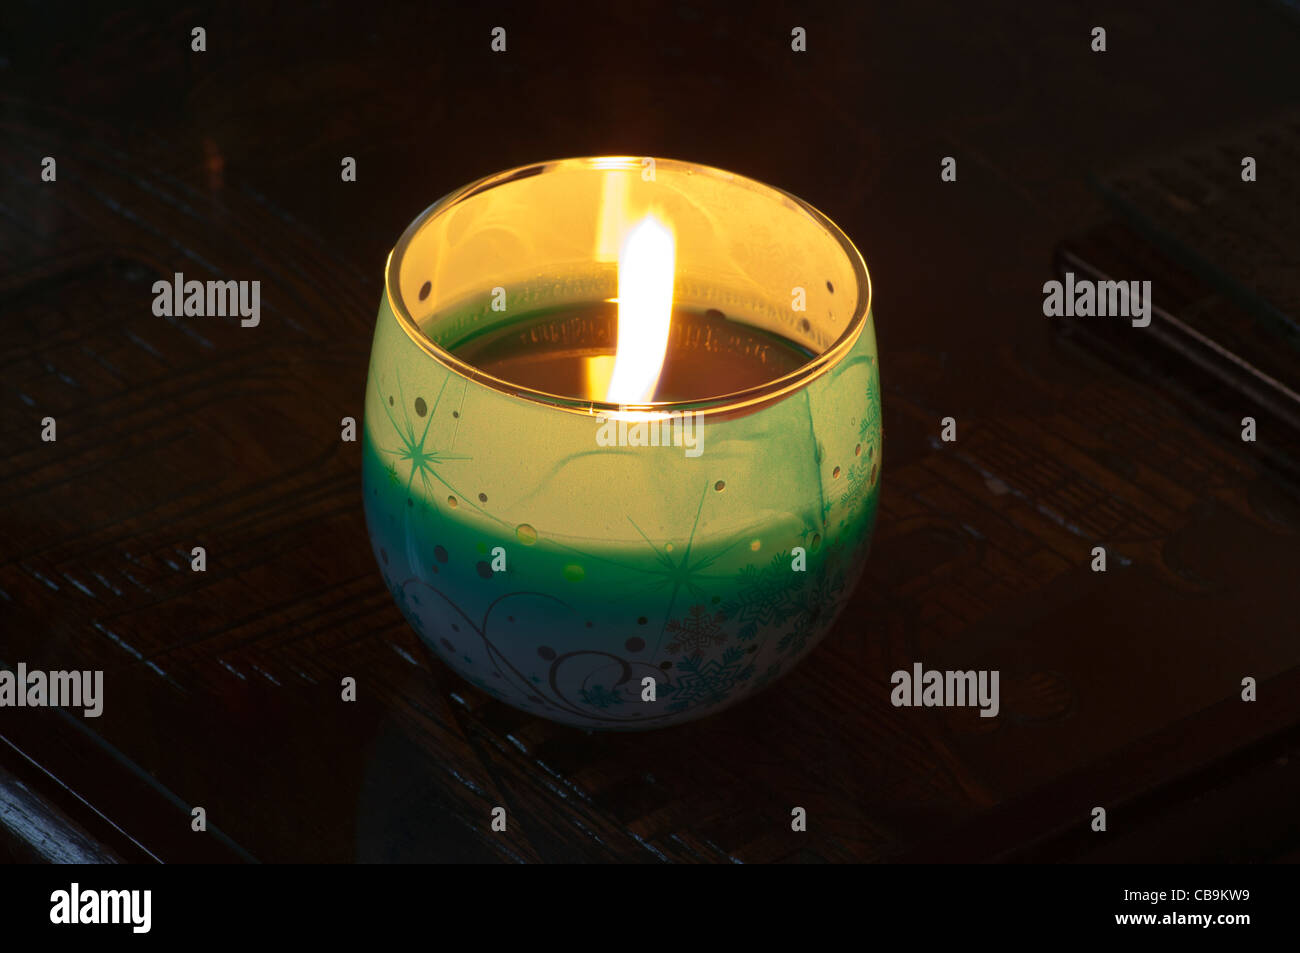 Lit Scented Candle Alight In A Glass Bowl Container flame burning Stock Photo